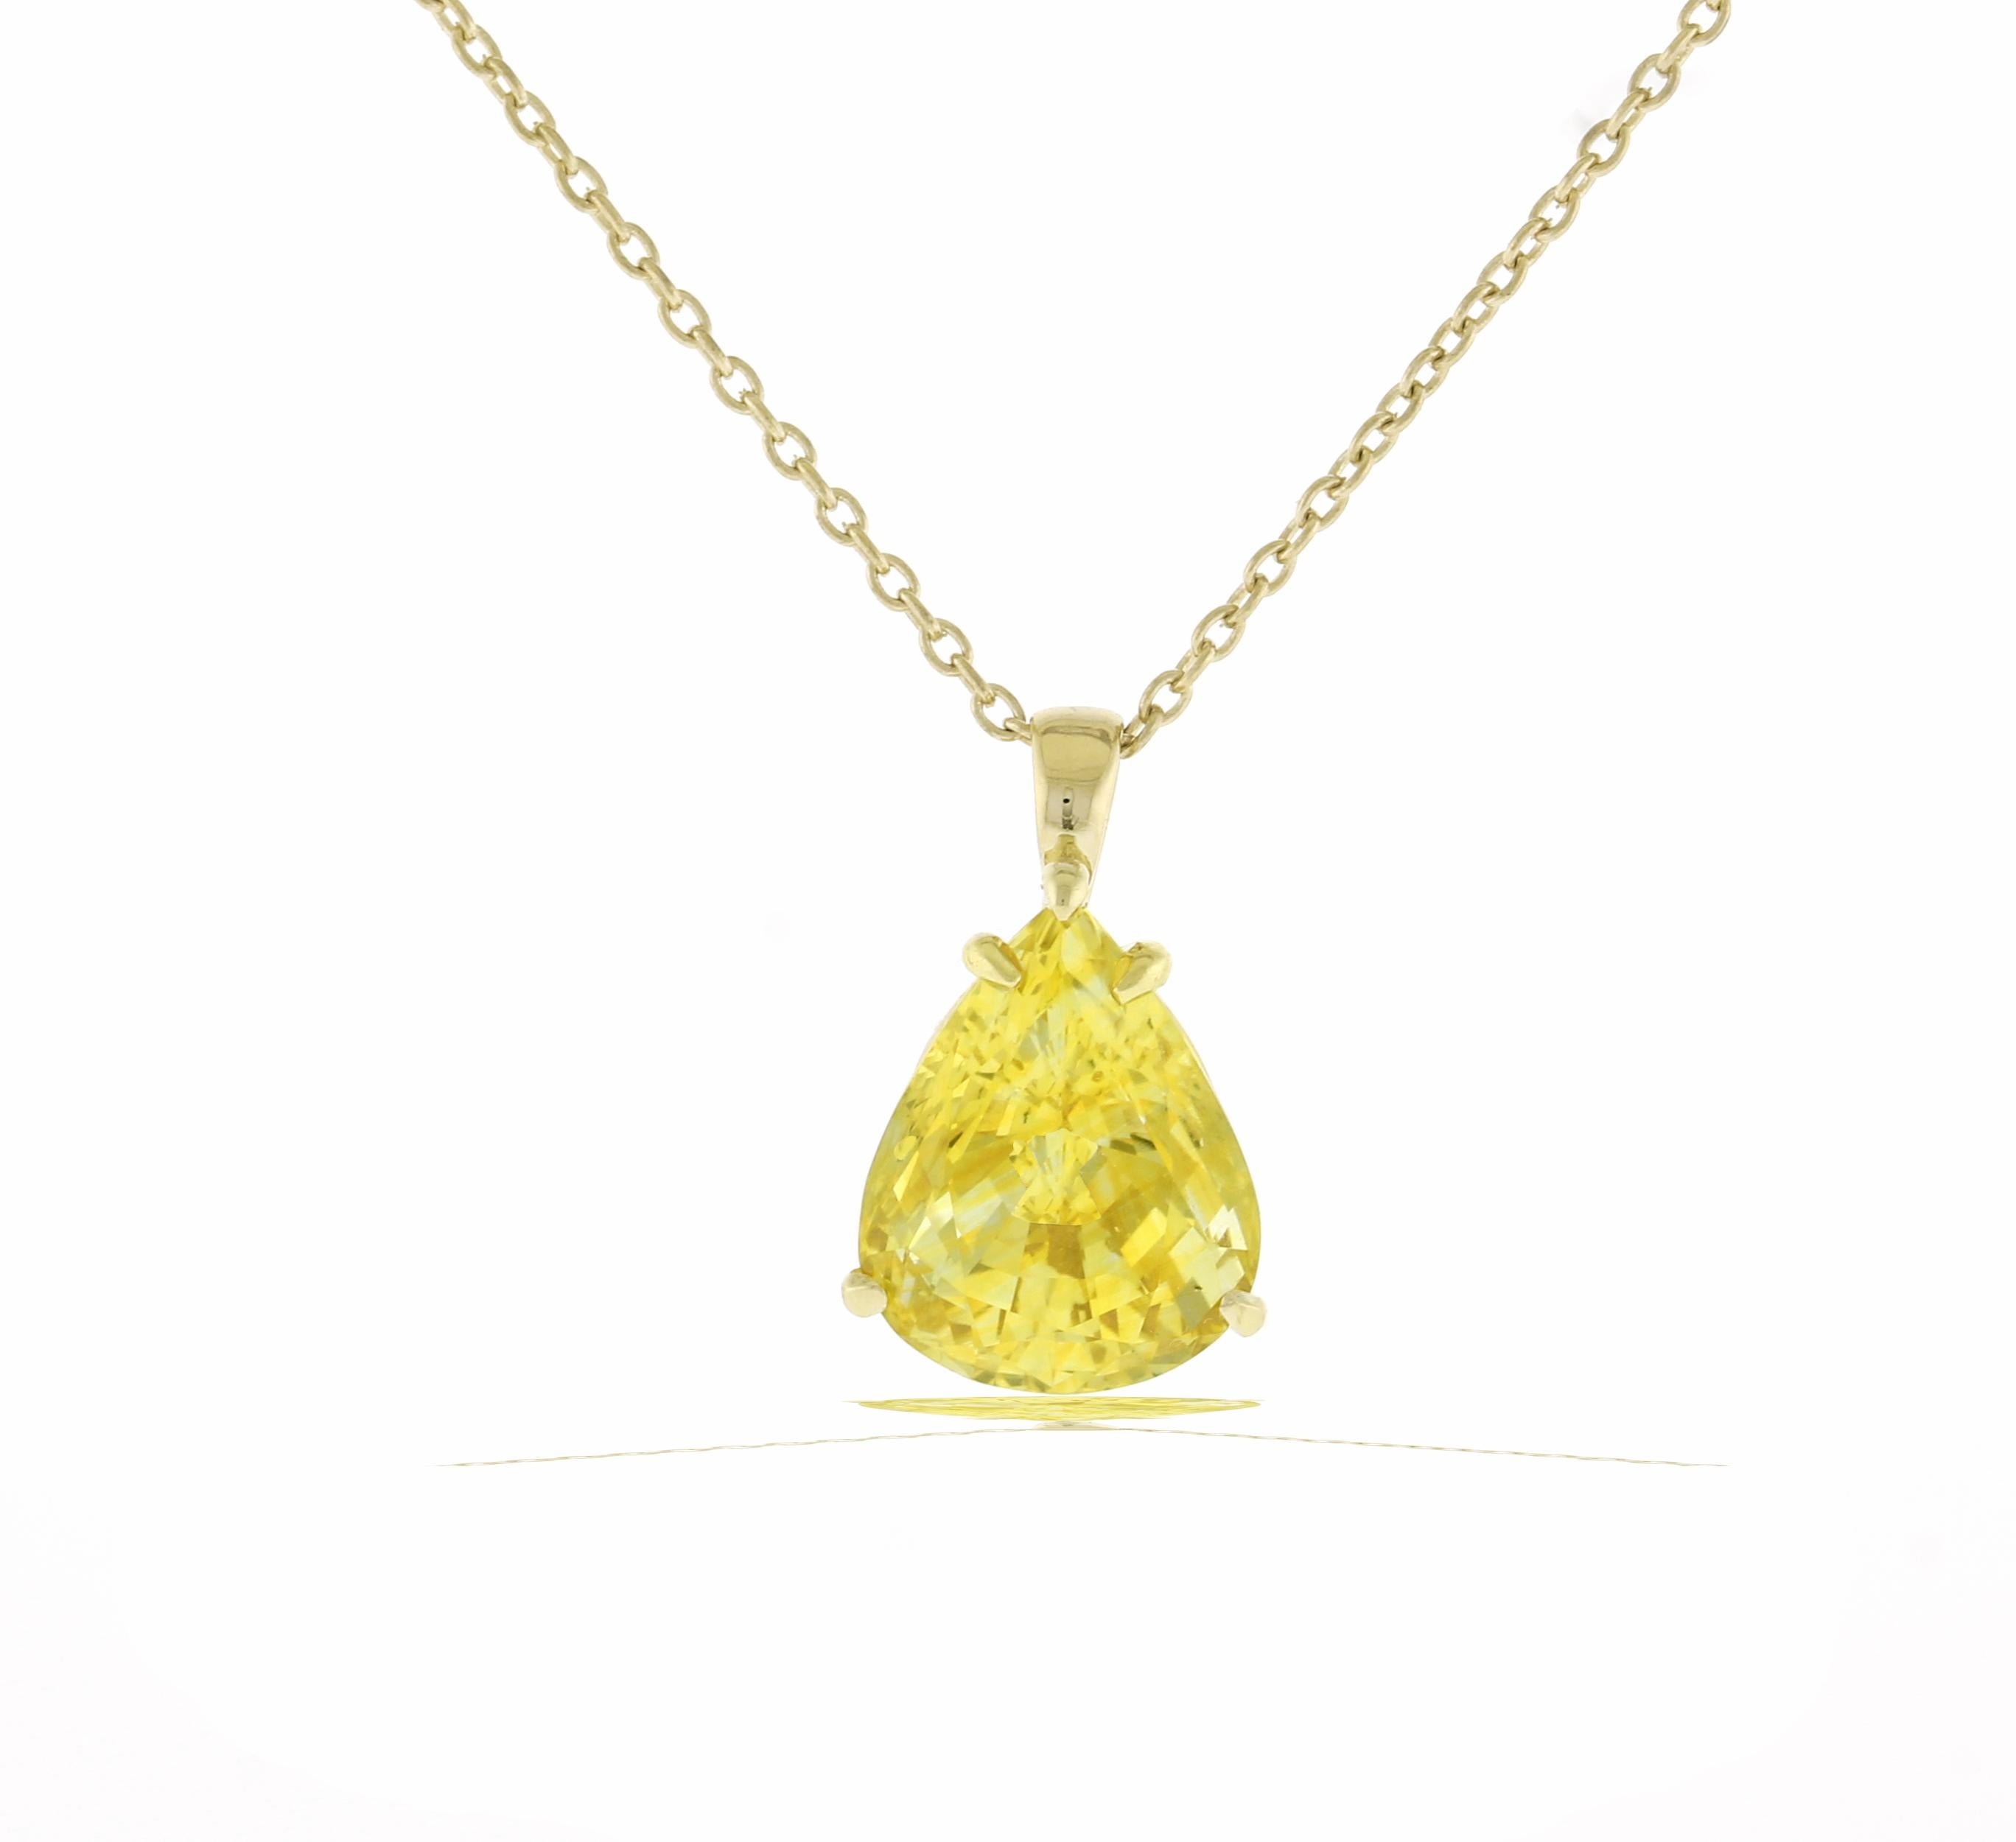 A wonderful natural yellow pear-shaped sapphire is gracefully suspended from a gold chain necklace.
• Designer: Pampillonia
• Metal: 18 karat gold
• Natural non heated Sapphire weighs 11.55
• Pear-shape =16.34*11.86	

 